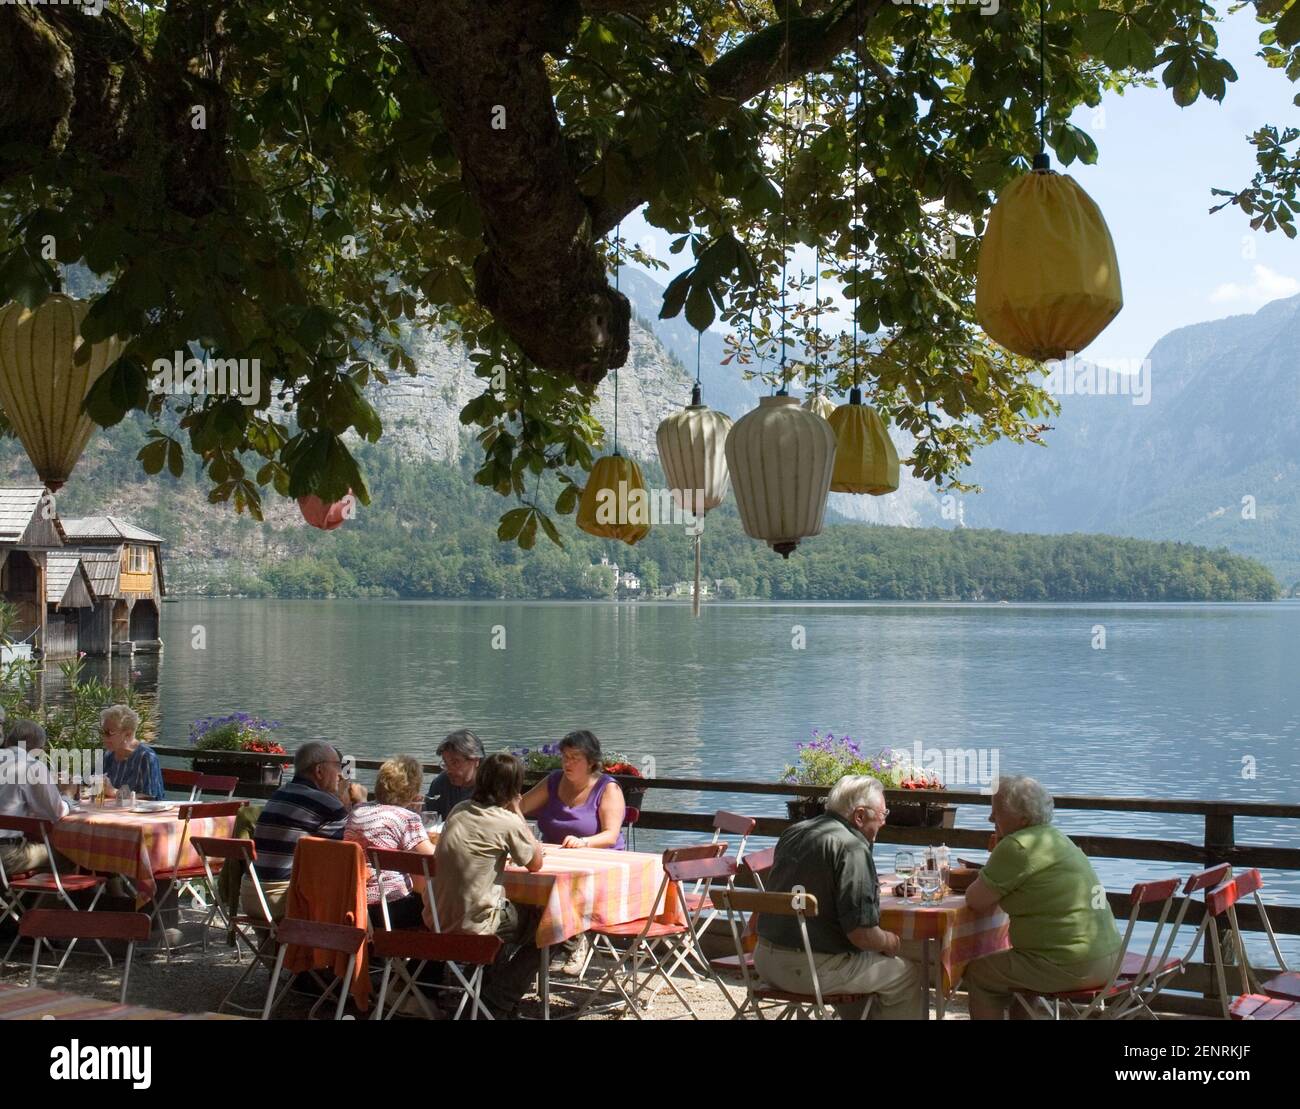 people at outdoor dining area at the lakeside of Hallstatt village shaded by chestnut trees with colourful lanterns, Hallstatt, Austra Stock Photo